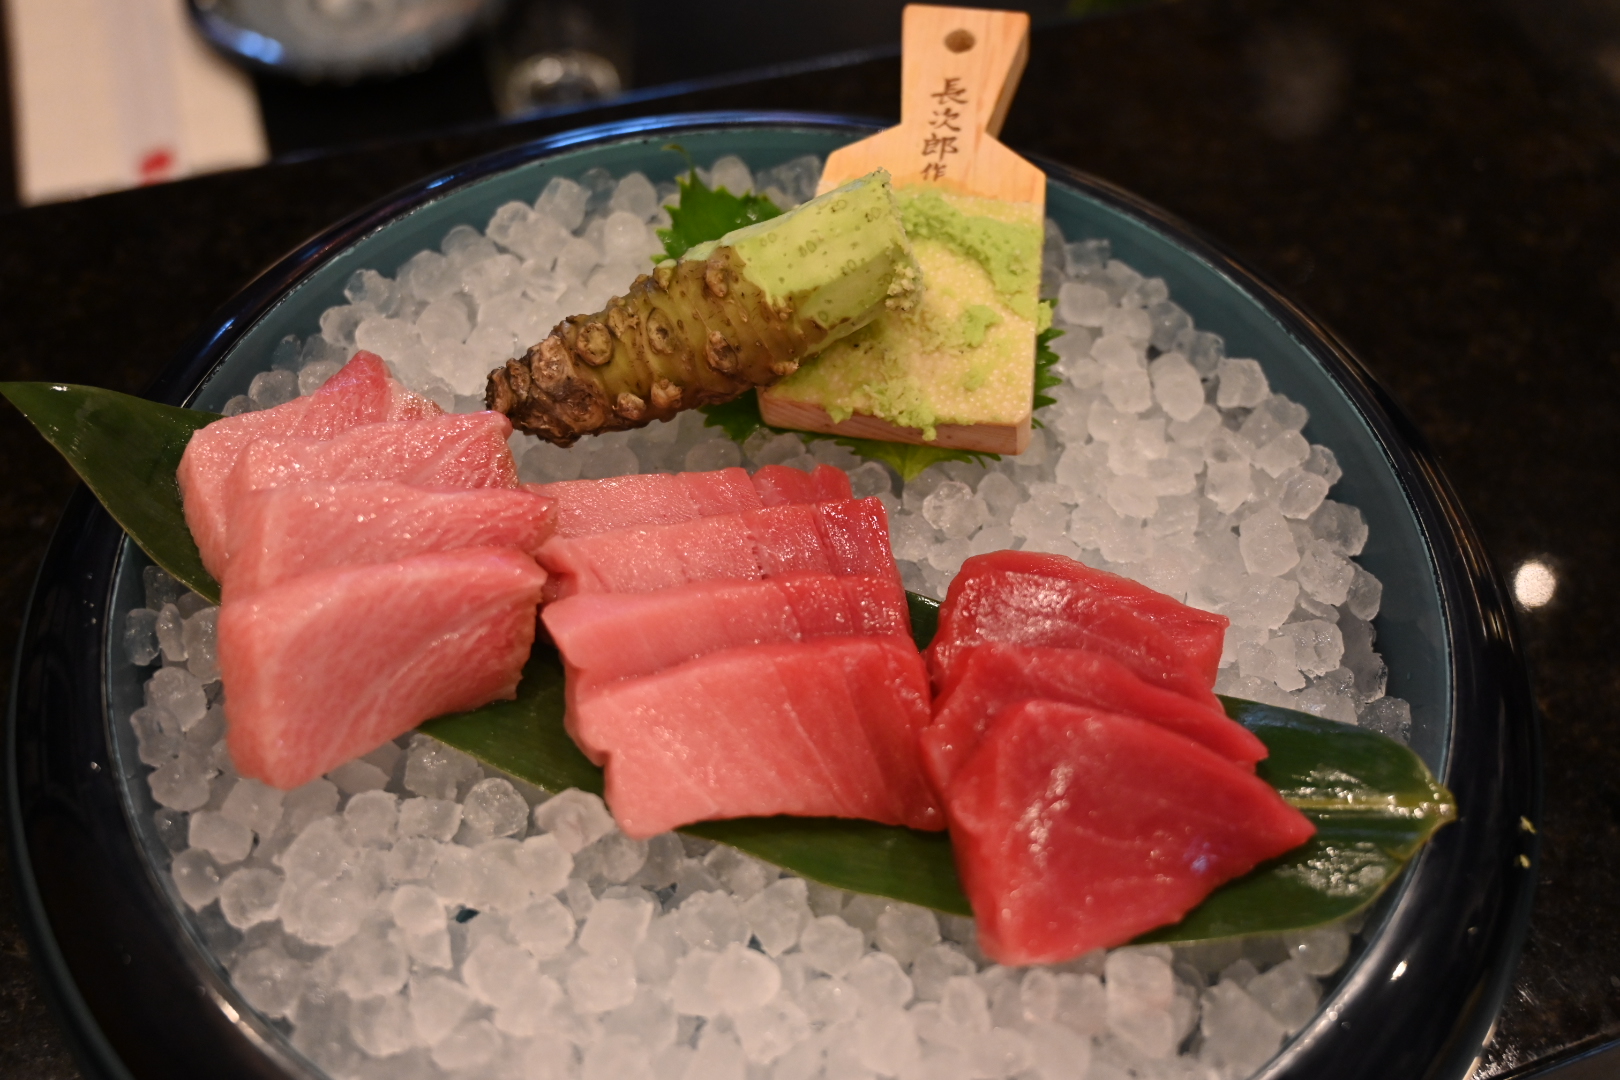 Pink and red cuts of sashimi sitting on a green leaf on a plate of crushed ice, with a hunk of fresh wasabi root set beside them and a small piece of wood where it’s being ground. 